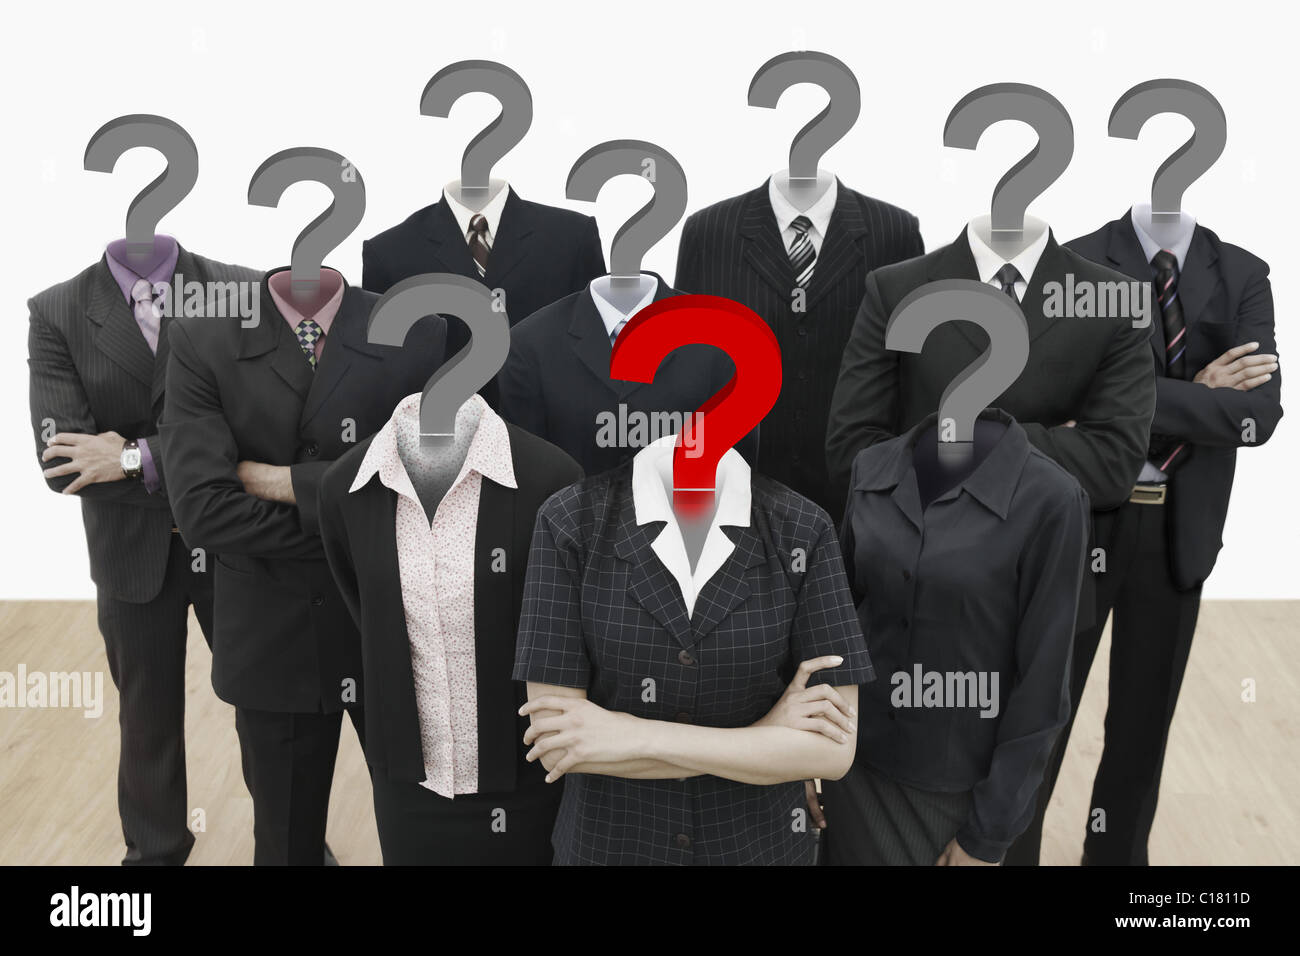 Business executives with question marks faces standing with their arms crossed Stock Photo